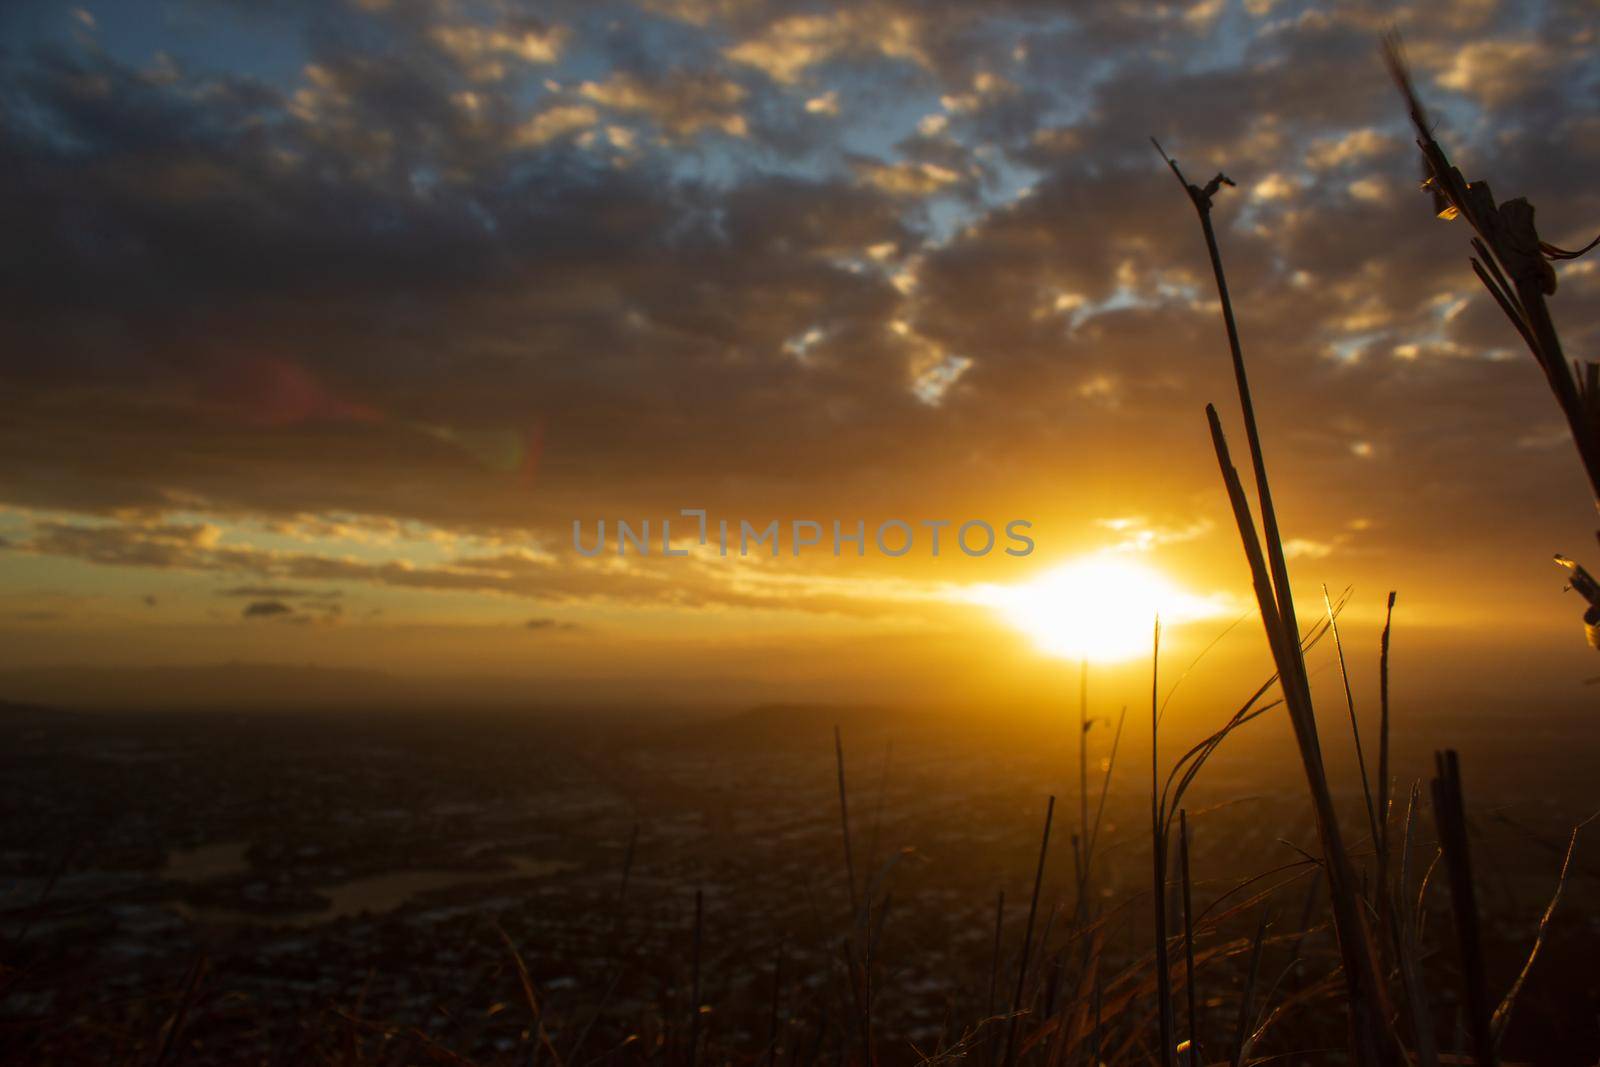 gras in front of a sunset view of Townsville, Castle Hill, Queensland, Australia by bettercallcurry